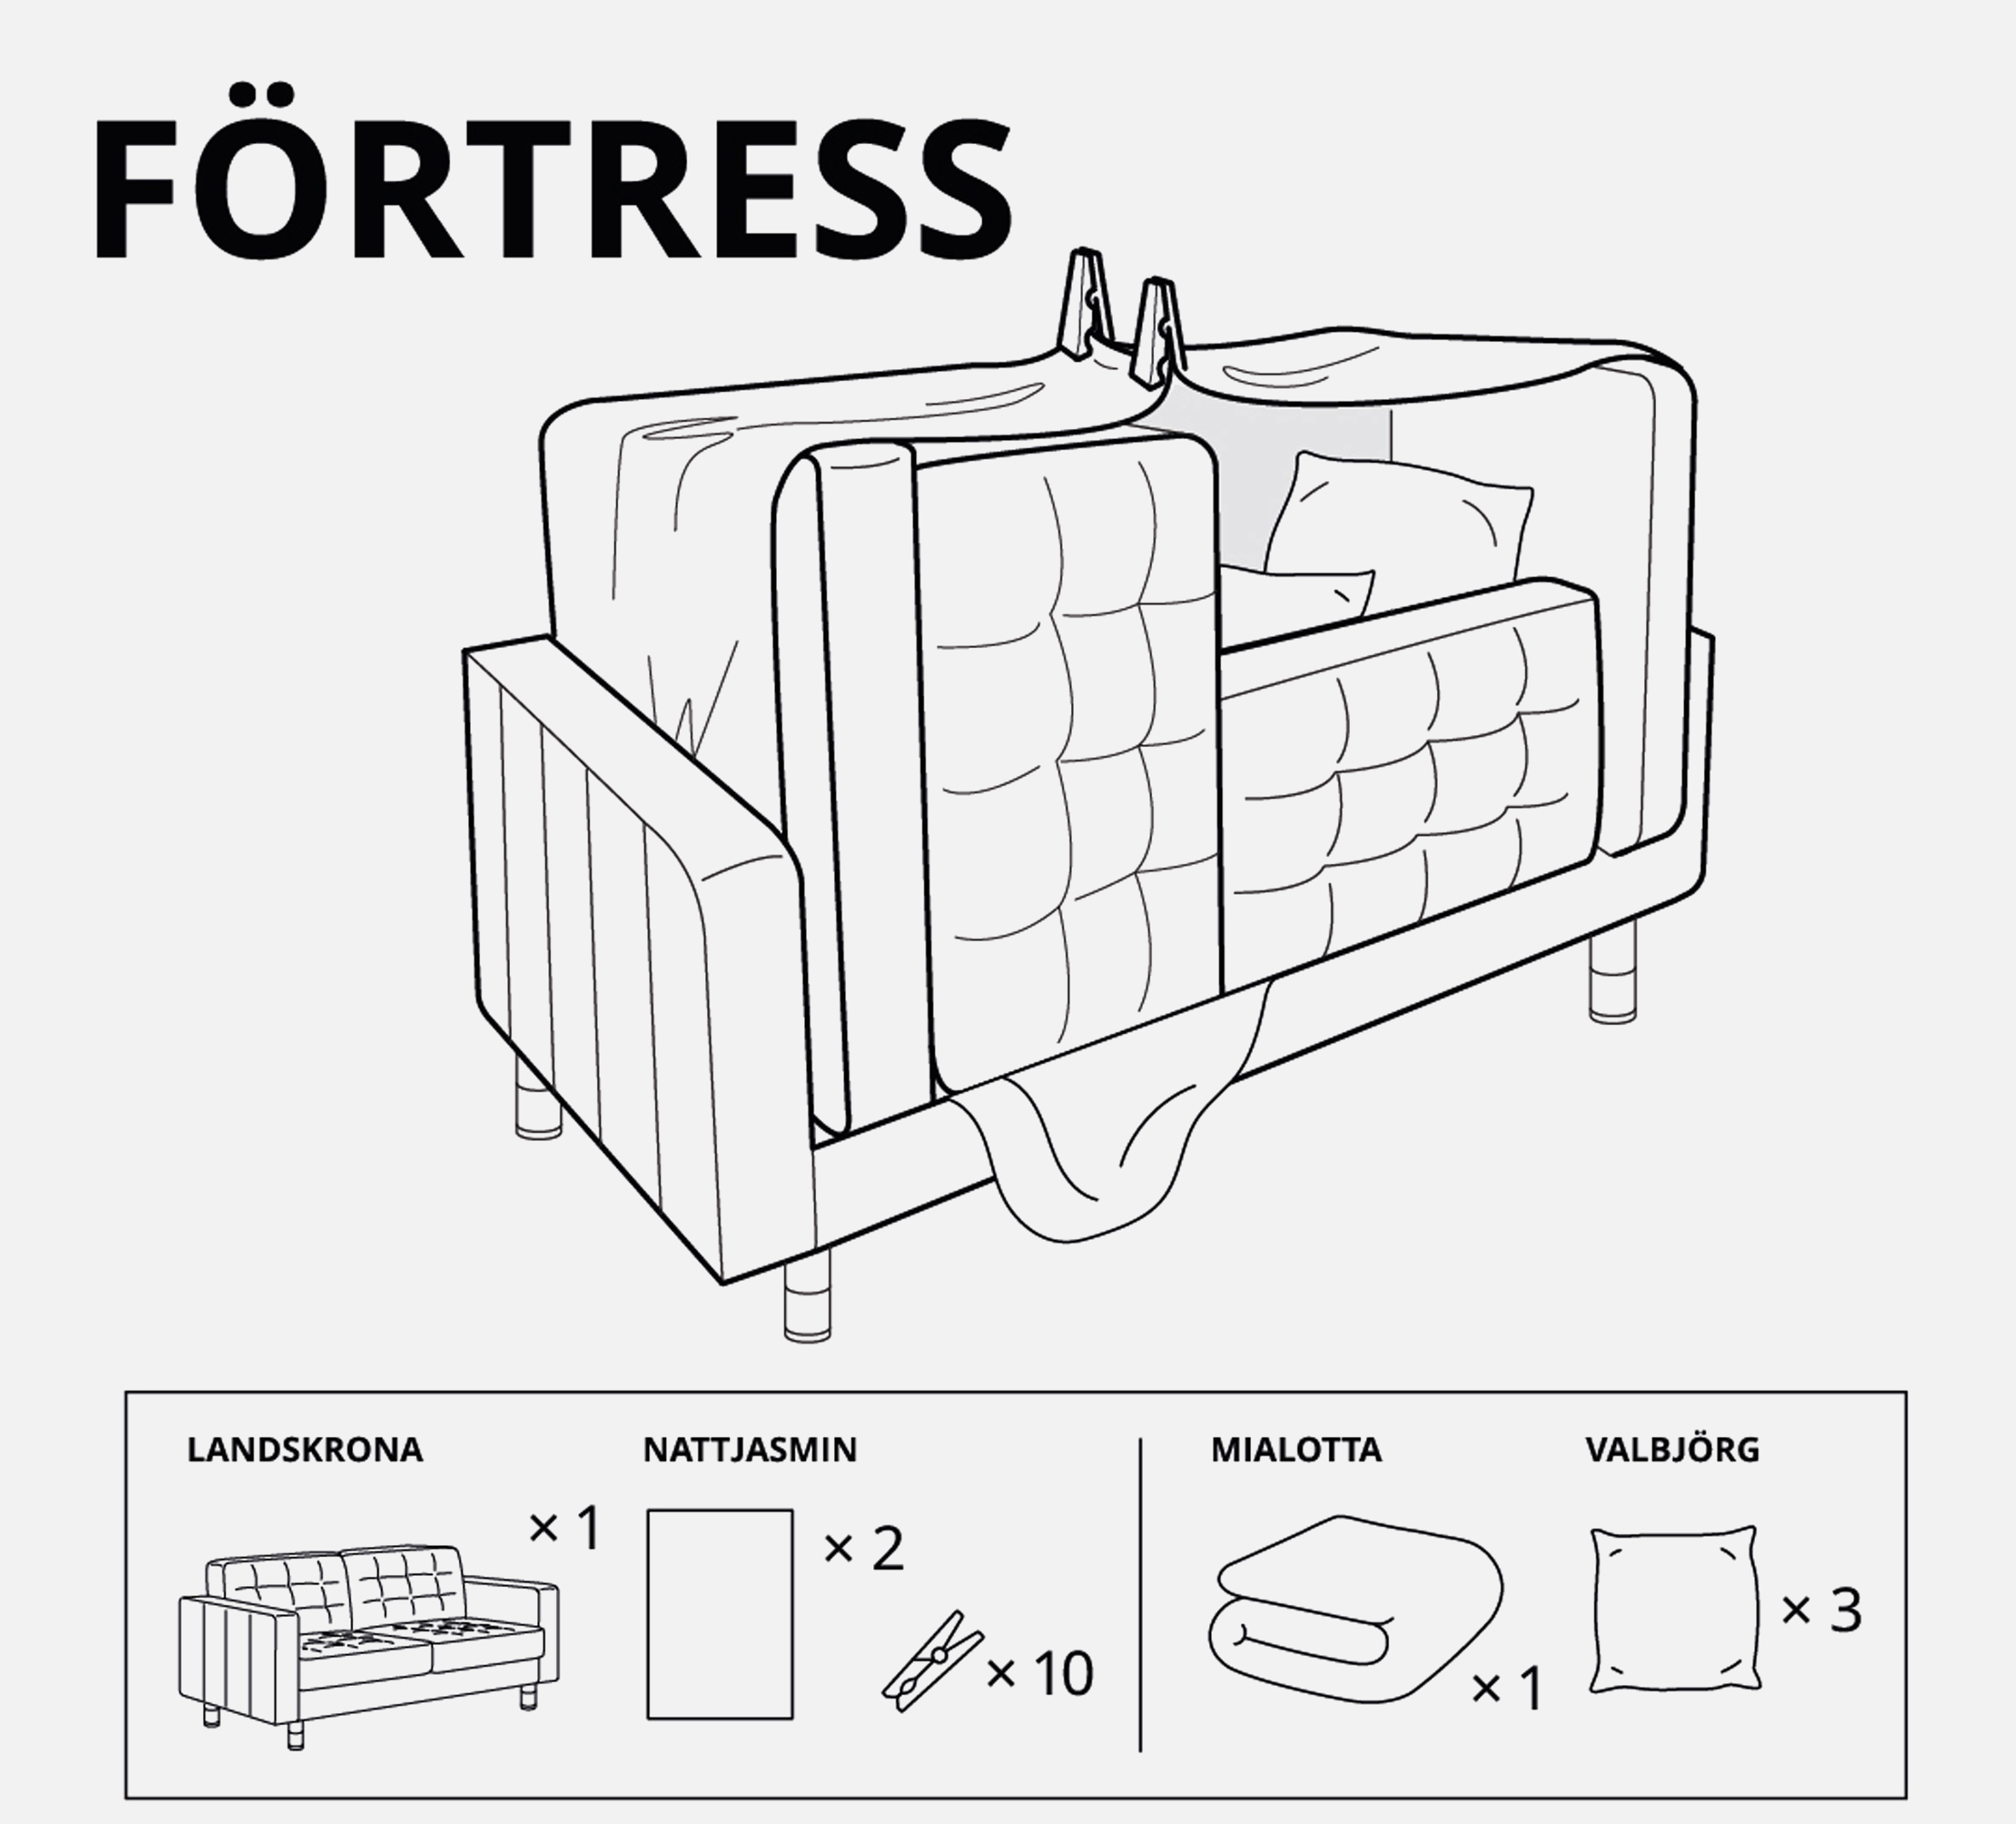 How to pronounce fortresses